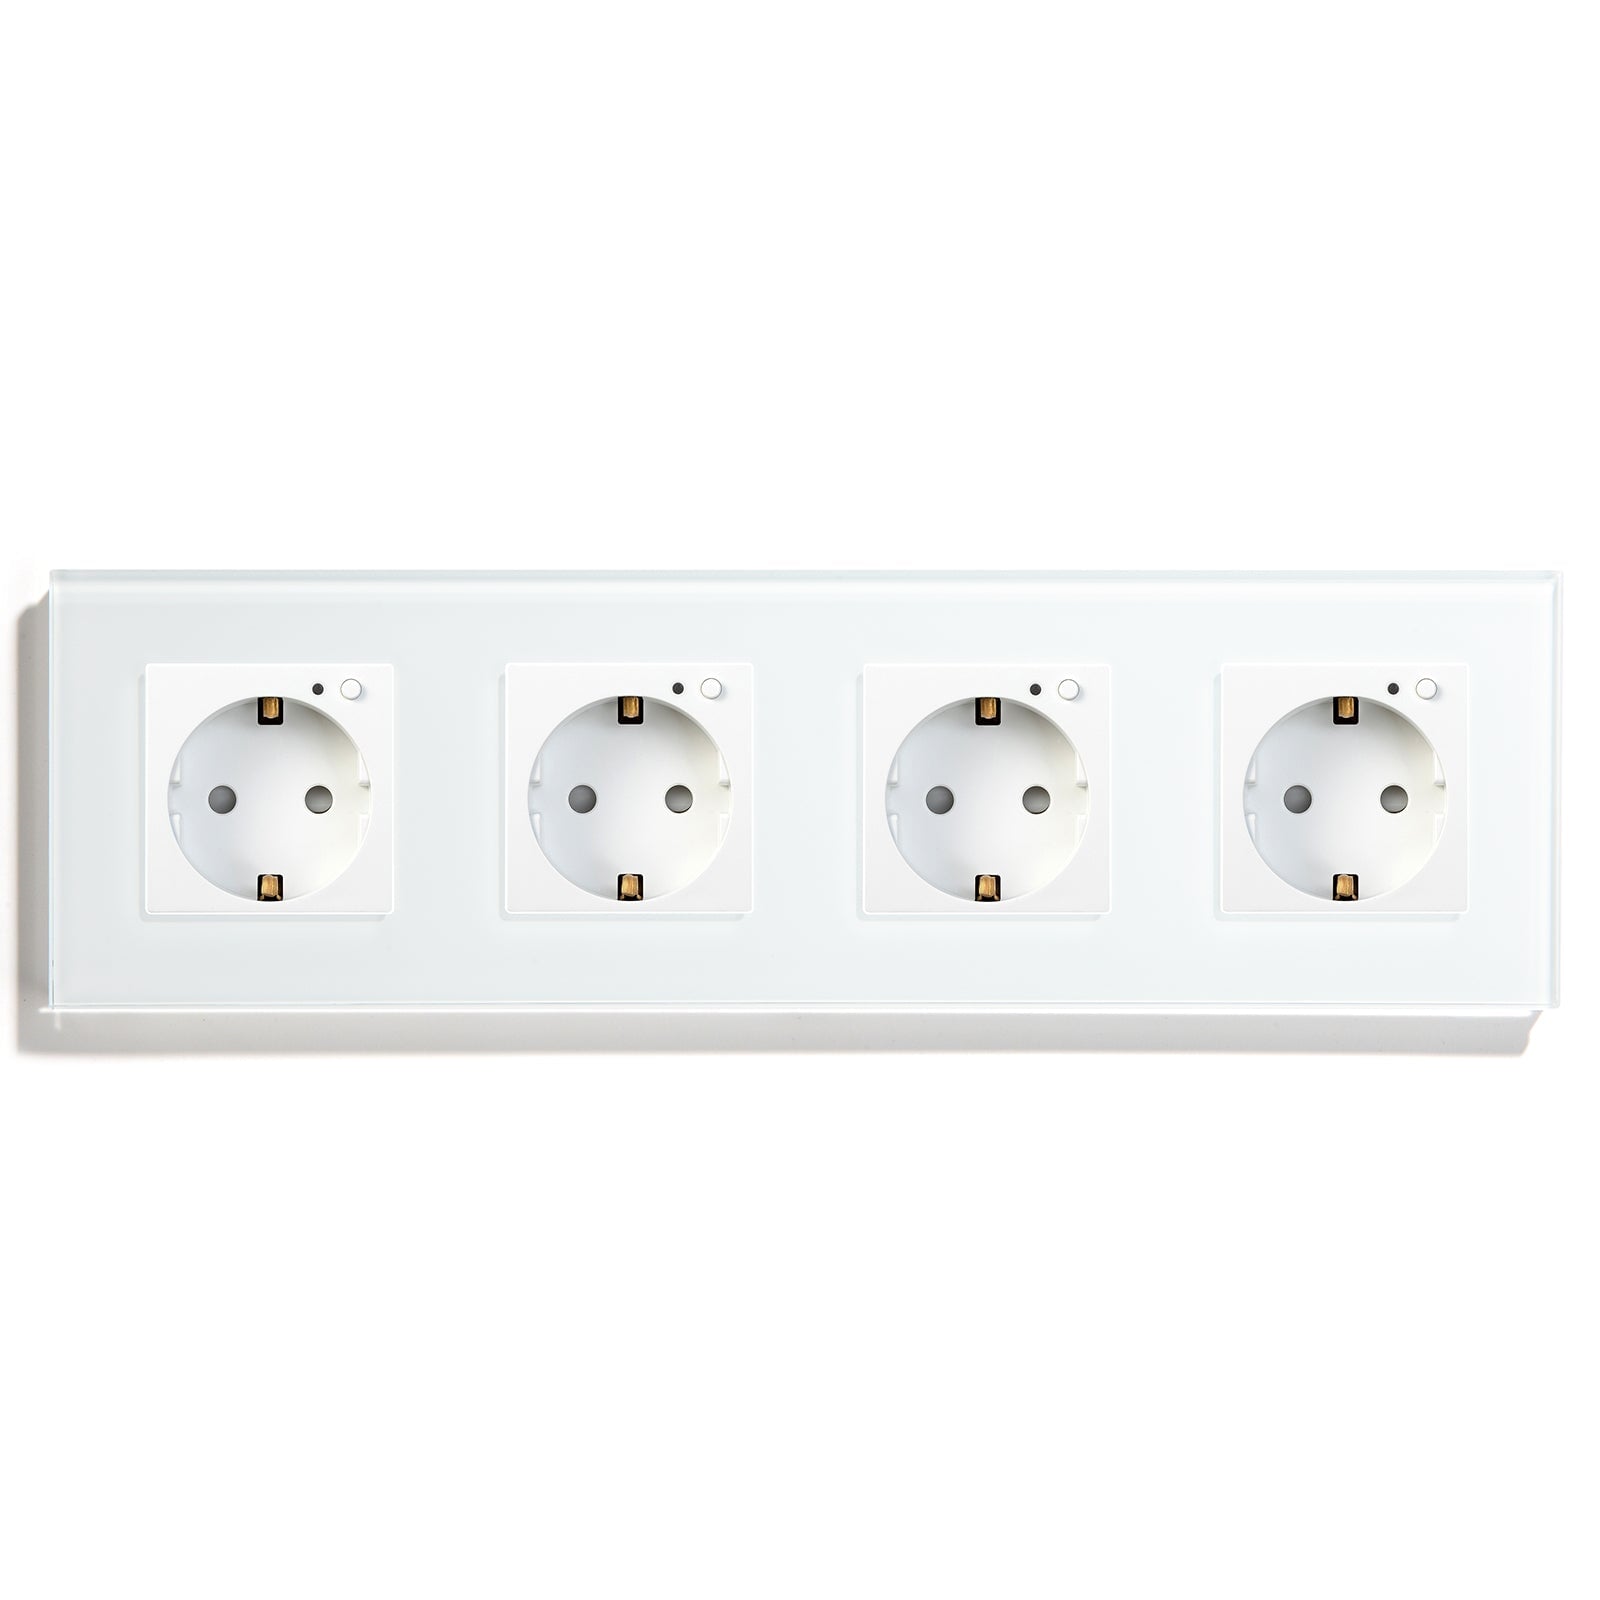 BSEED ZigBee EU Wall Sockets Power Outlets Kids Protection Wall Plates & Covers Bseedswitch white Quadruple 